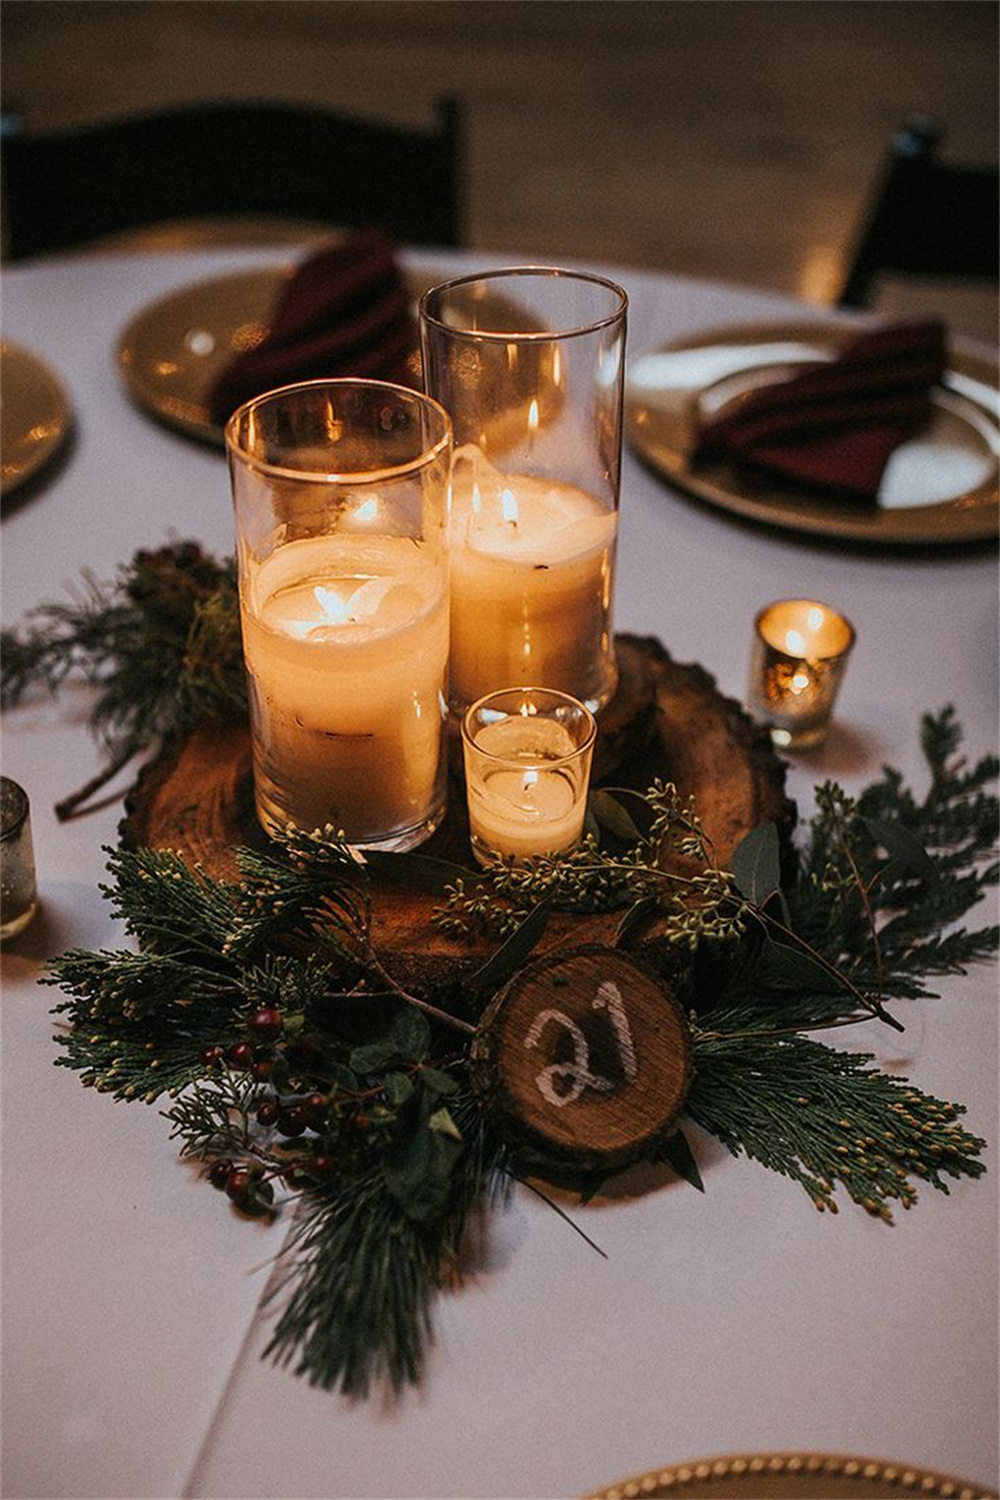 Vintage Christmas Centerpieces with Candles